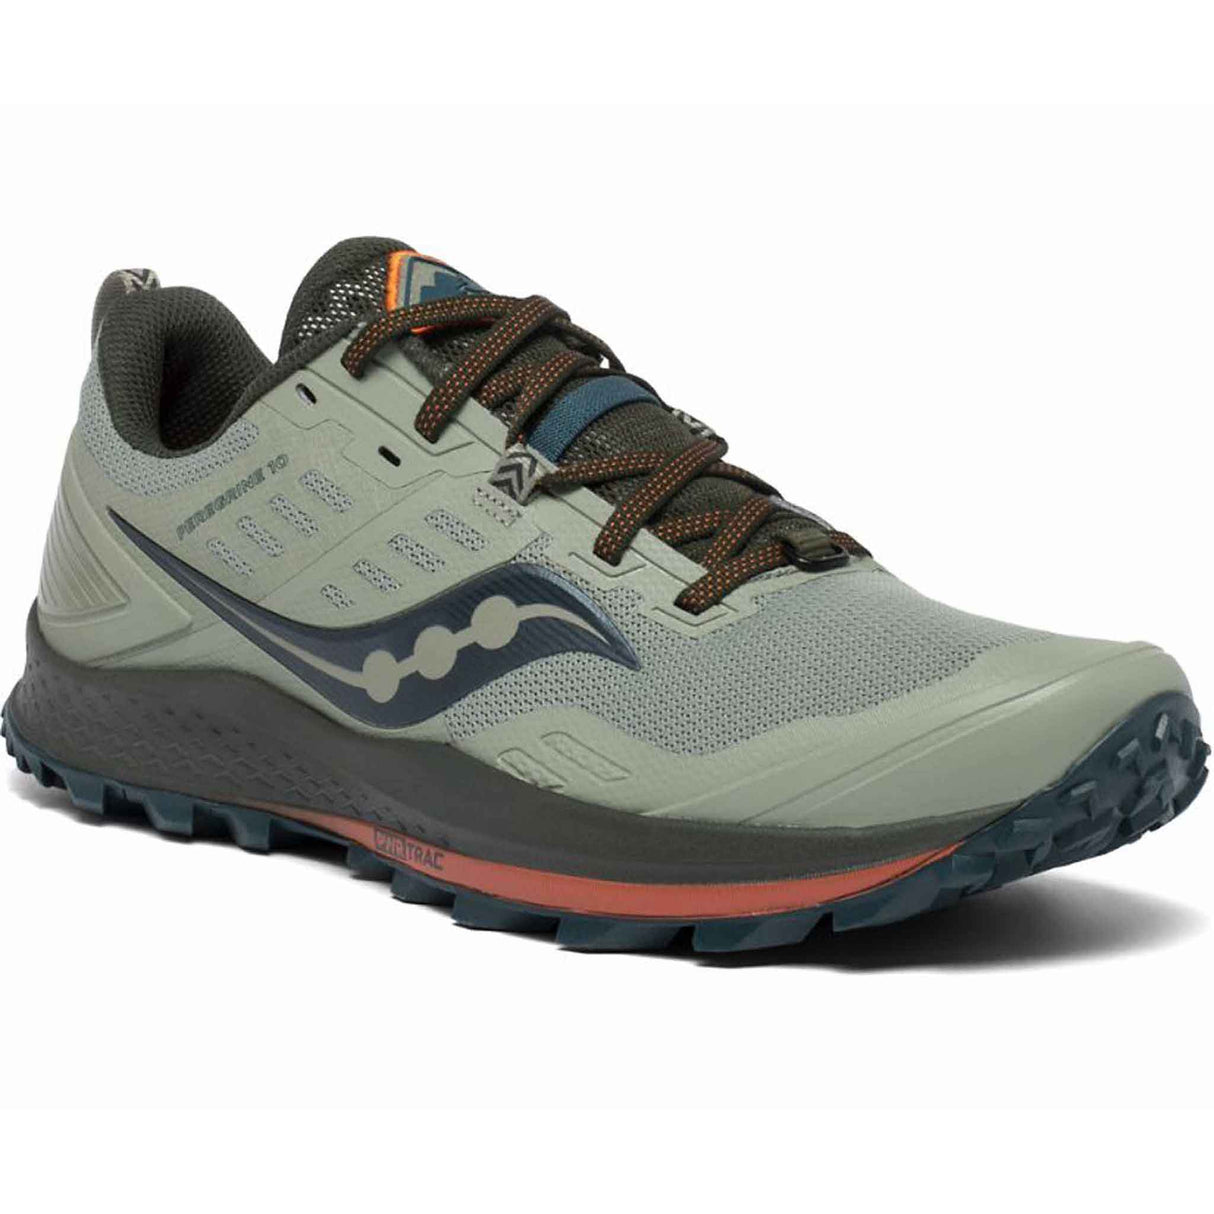 Saucony Peregrine 10 trail running shoes for men